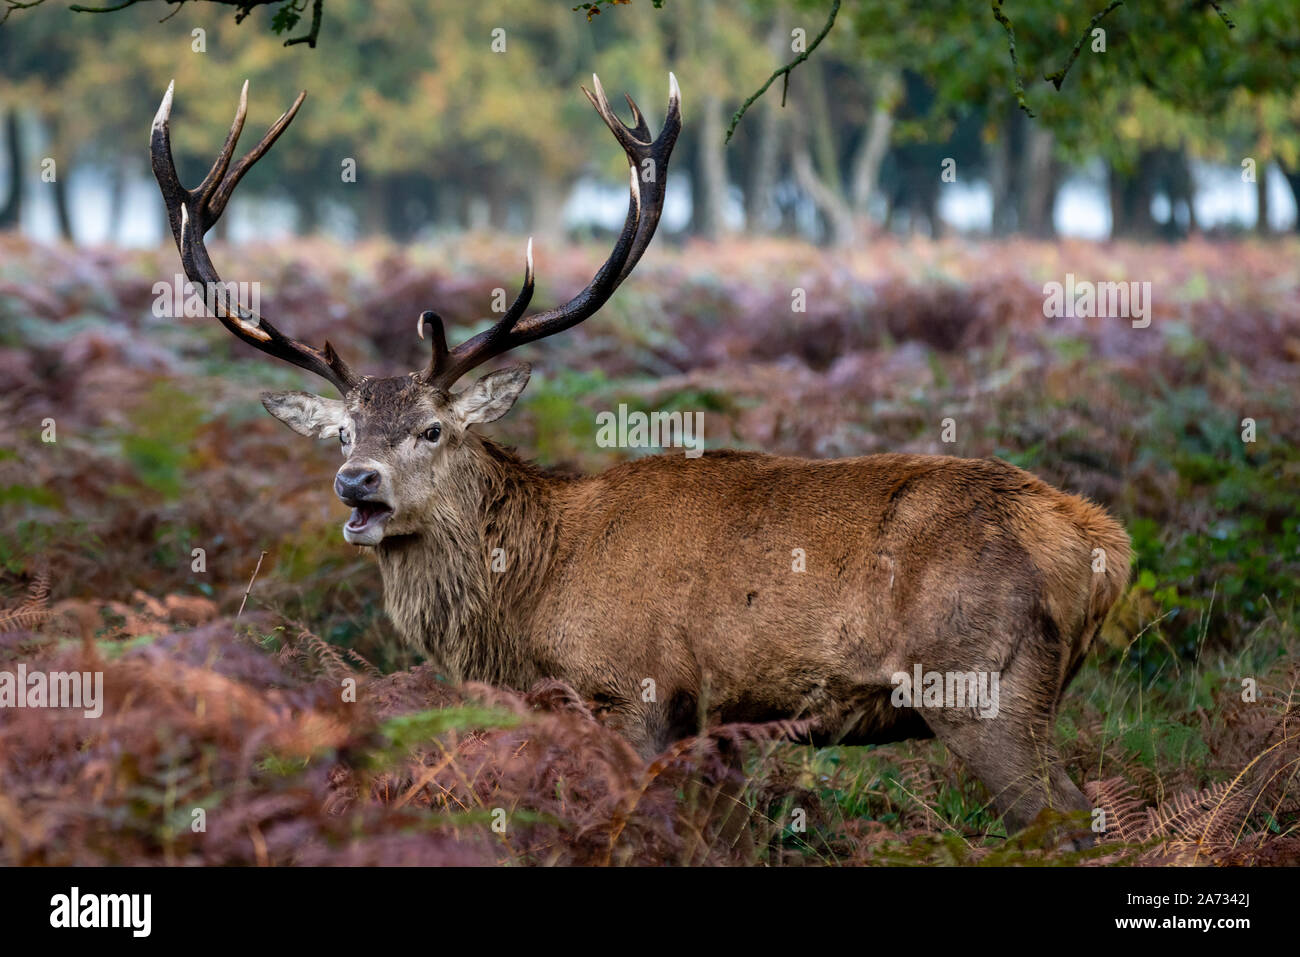 London, UK. 27th Oct 2019. An early morning deer roars in Richmond Park, where over 600 deer roam freely. Credit: Guy Corbishley/Alamy Live News Stock Photo